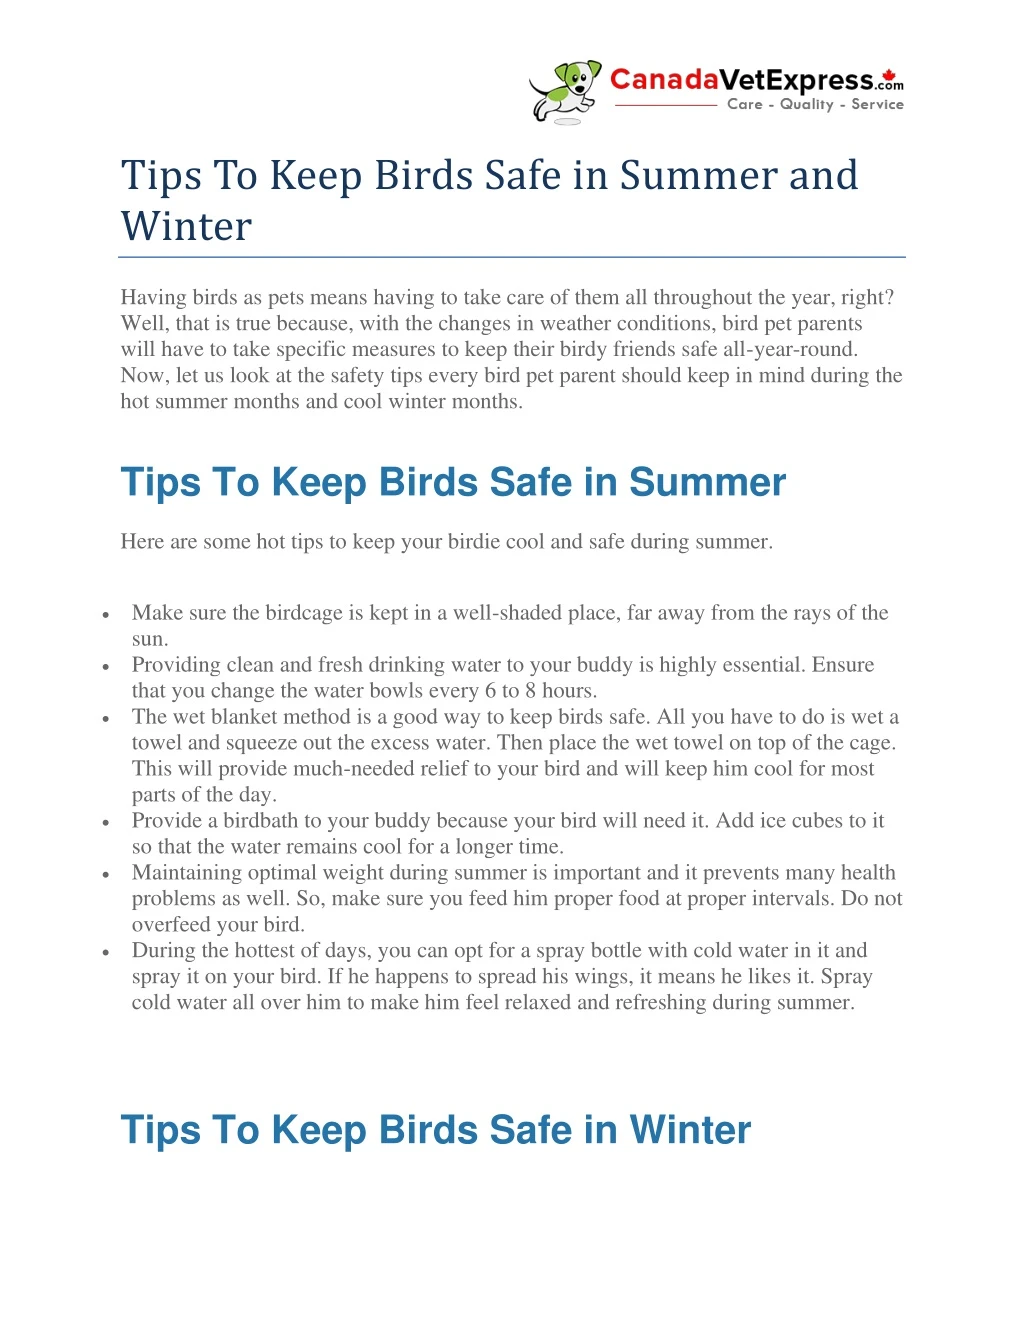 tips to keep birds safe in summer and winter